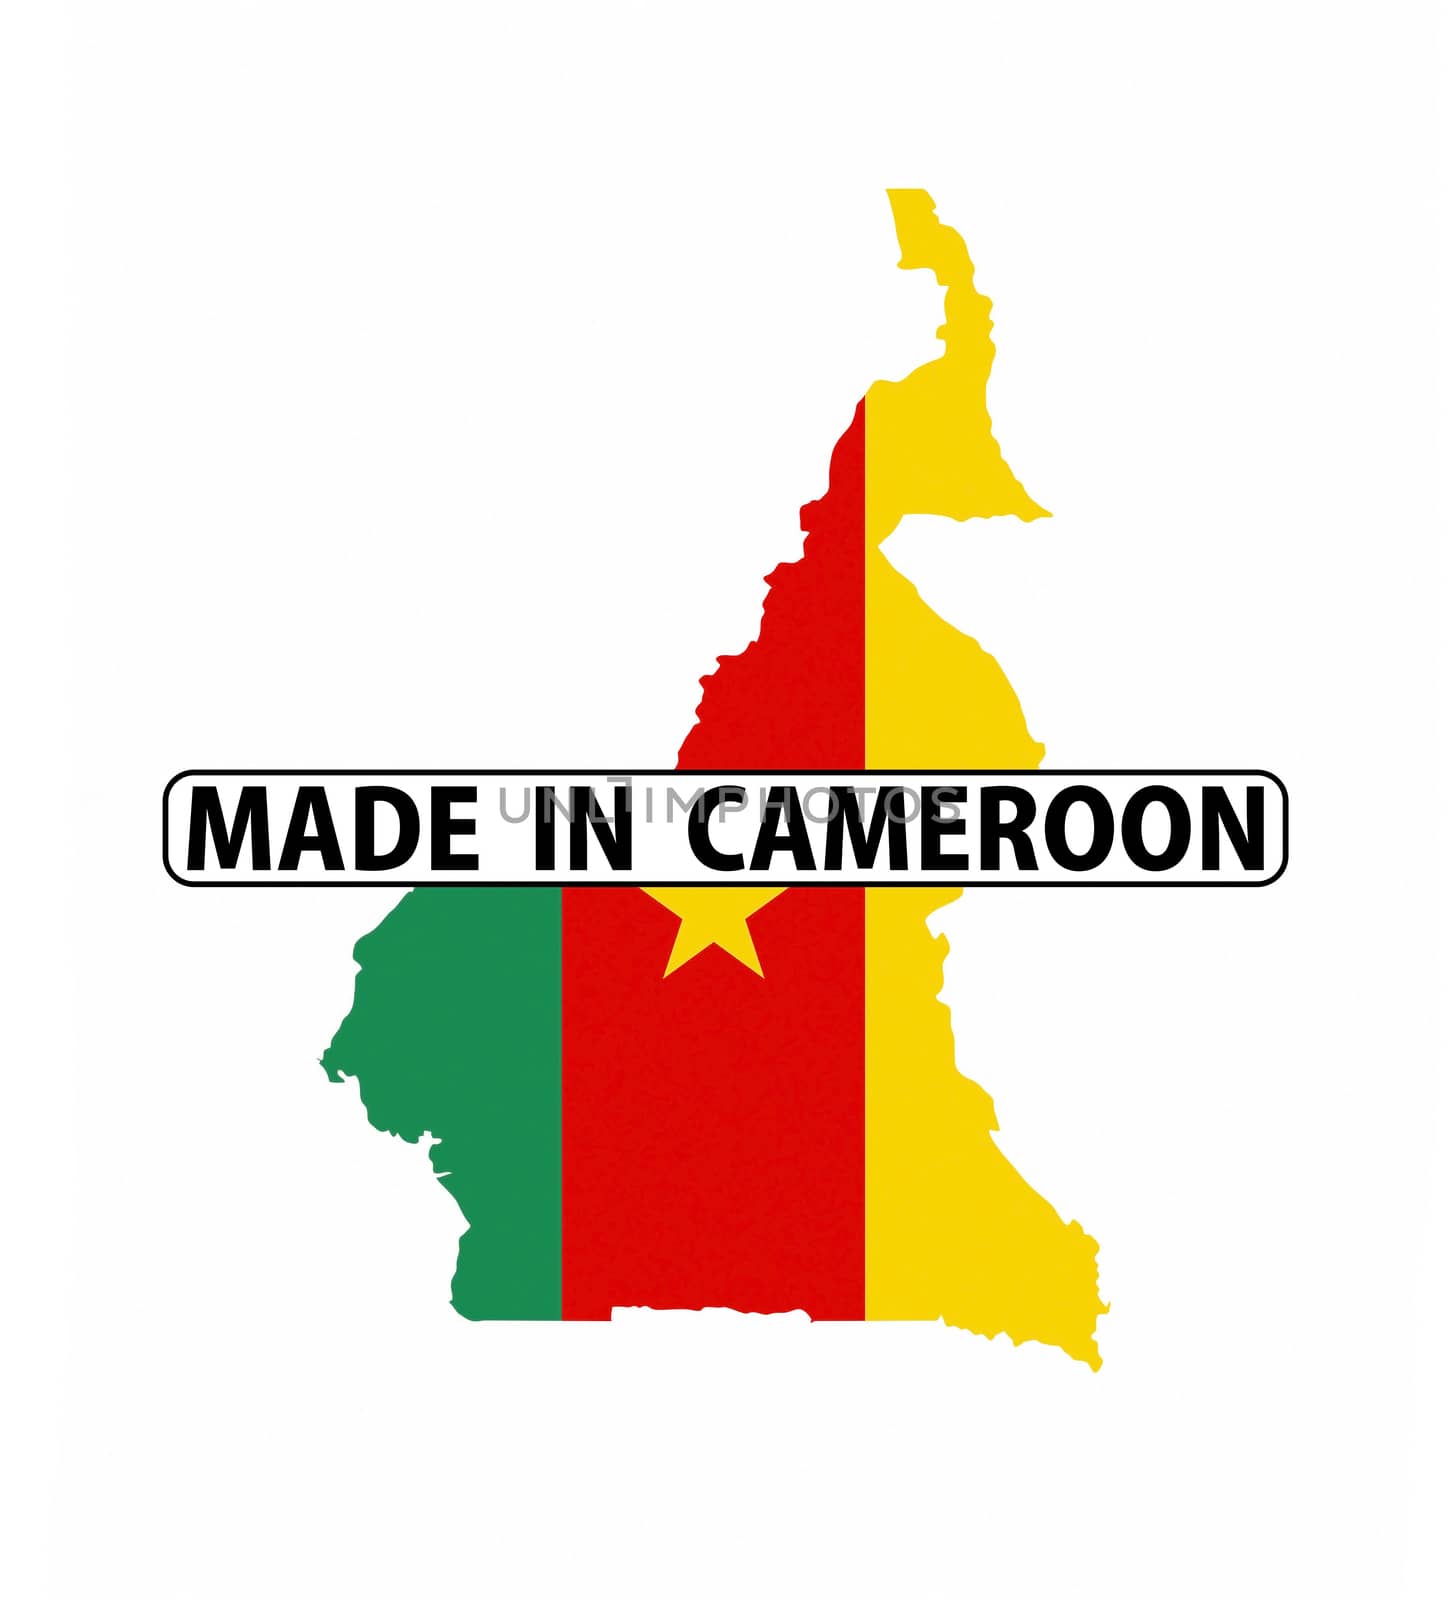 made in cameroon by tony4urban